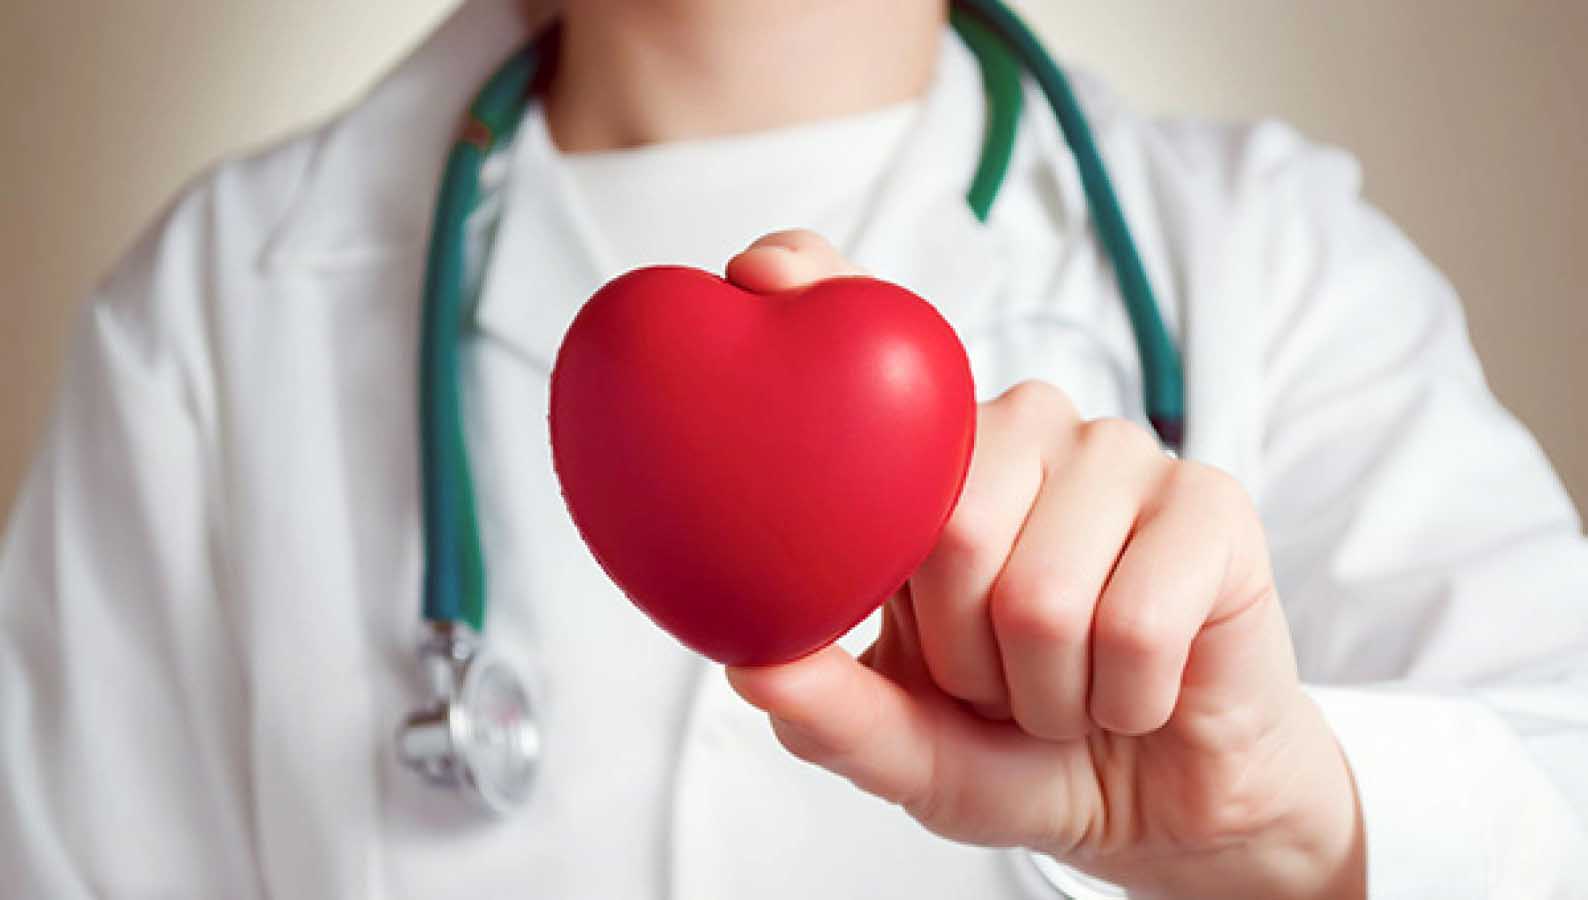 World Heart Day: Pain as a Warning Sign of Heart Disease